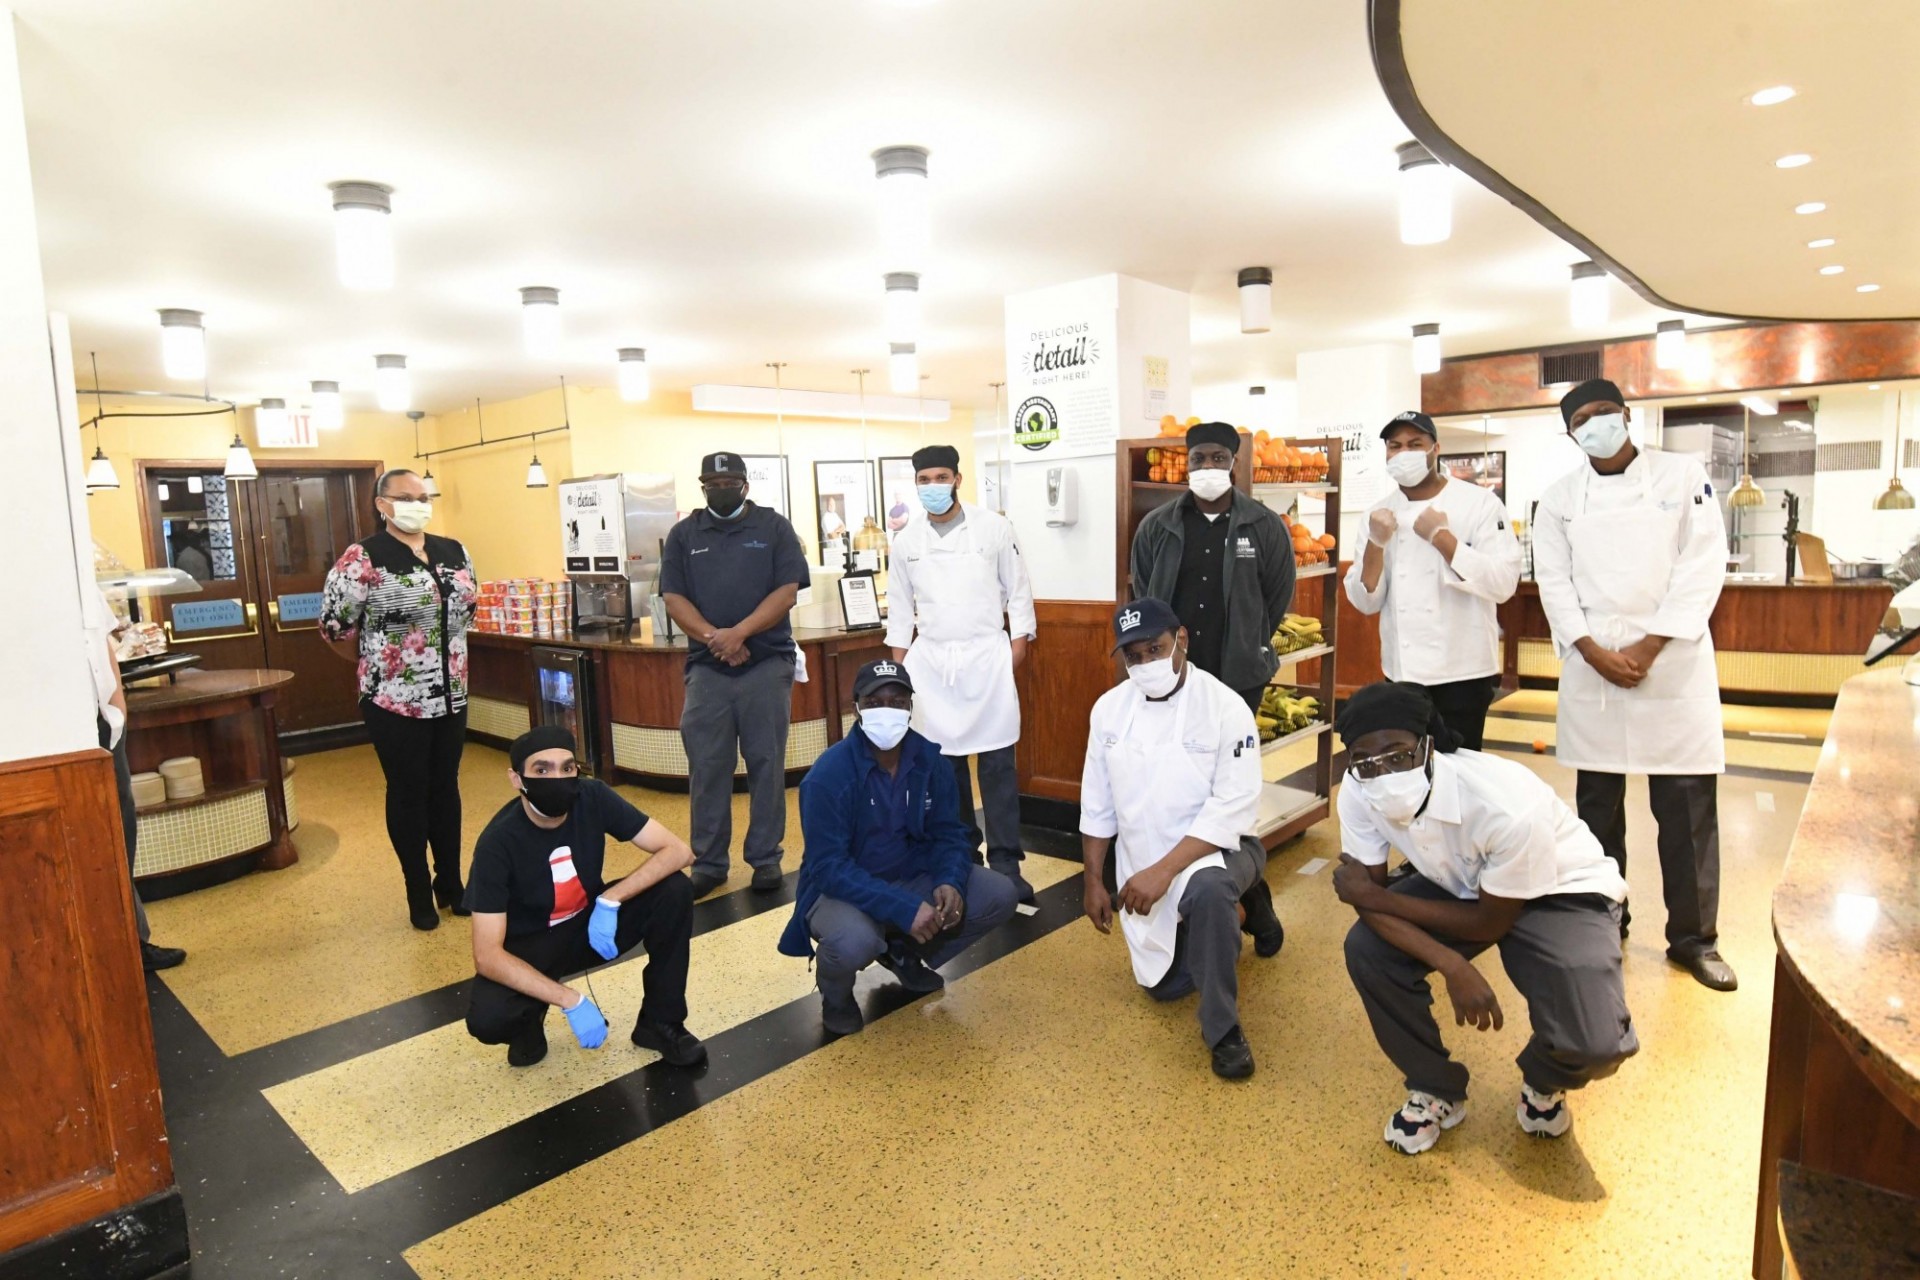 A group of Columbia Dining employees gather around in John Jay Dining Hall.